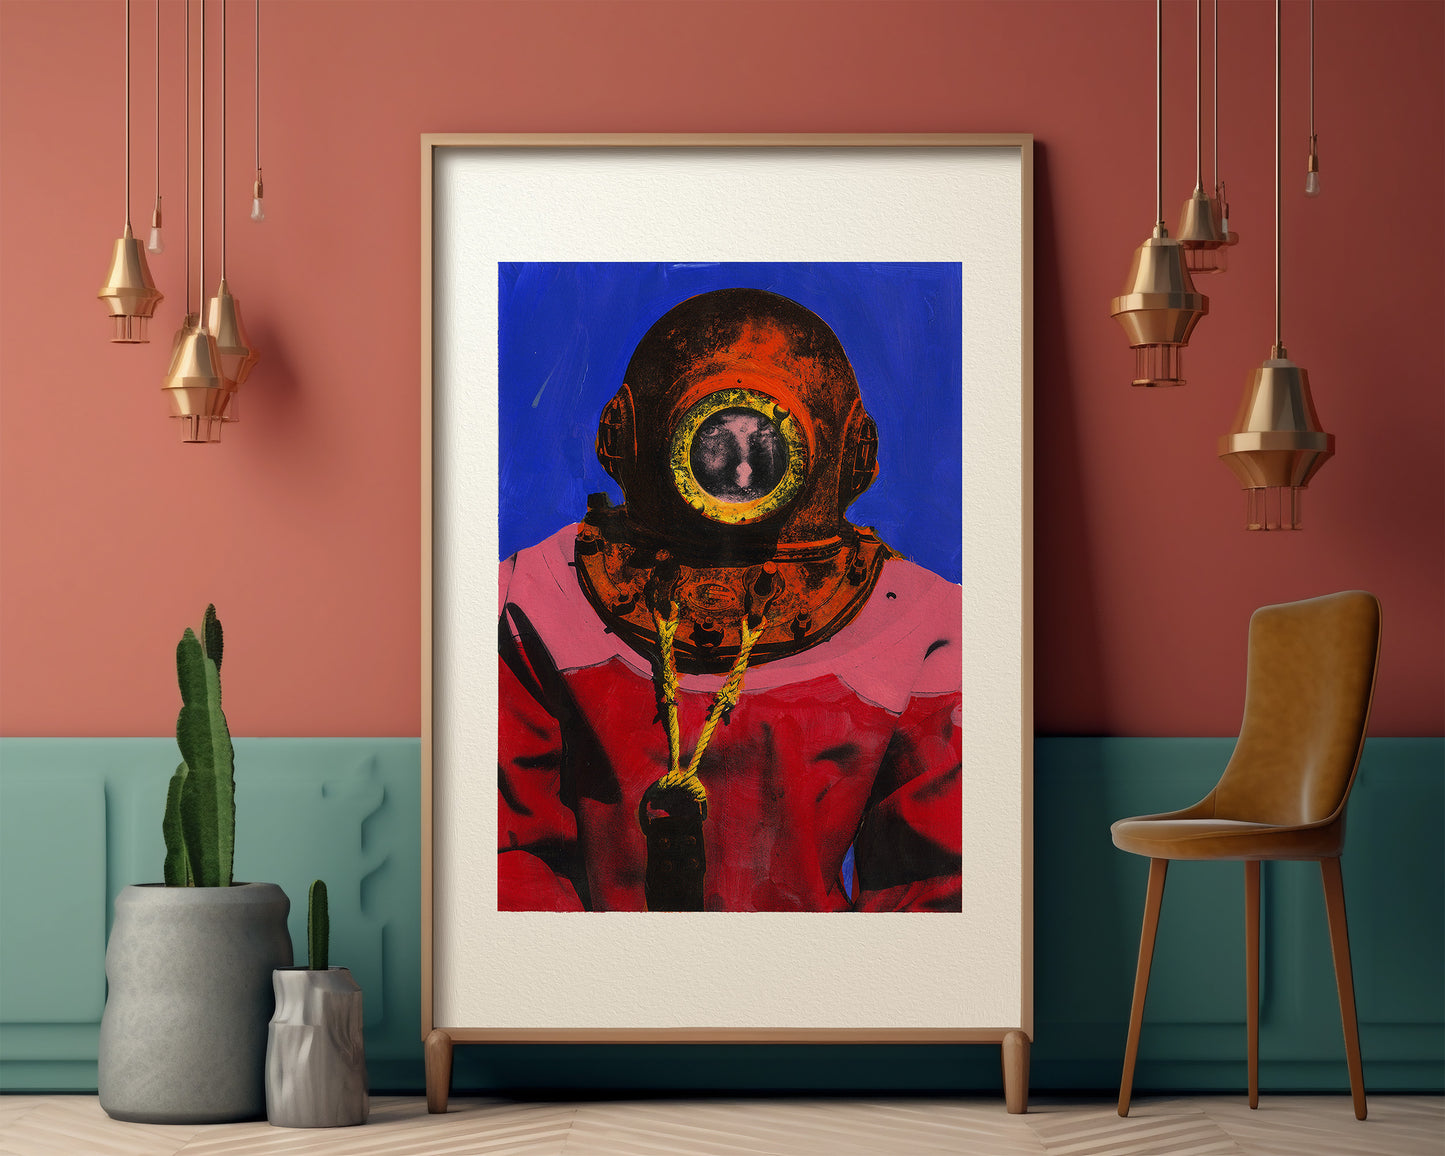 Painting Pop Art Wall Art from Greece | Royal Blue sponge diver from Kalymnos island, by George Tatakis - inside an eclectic room